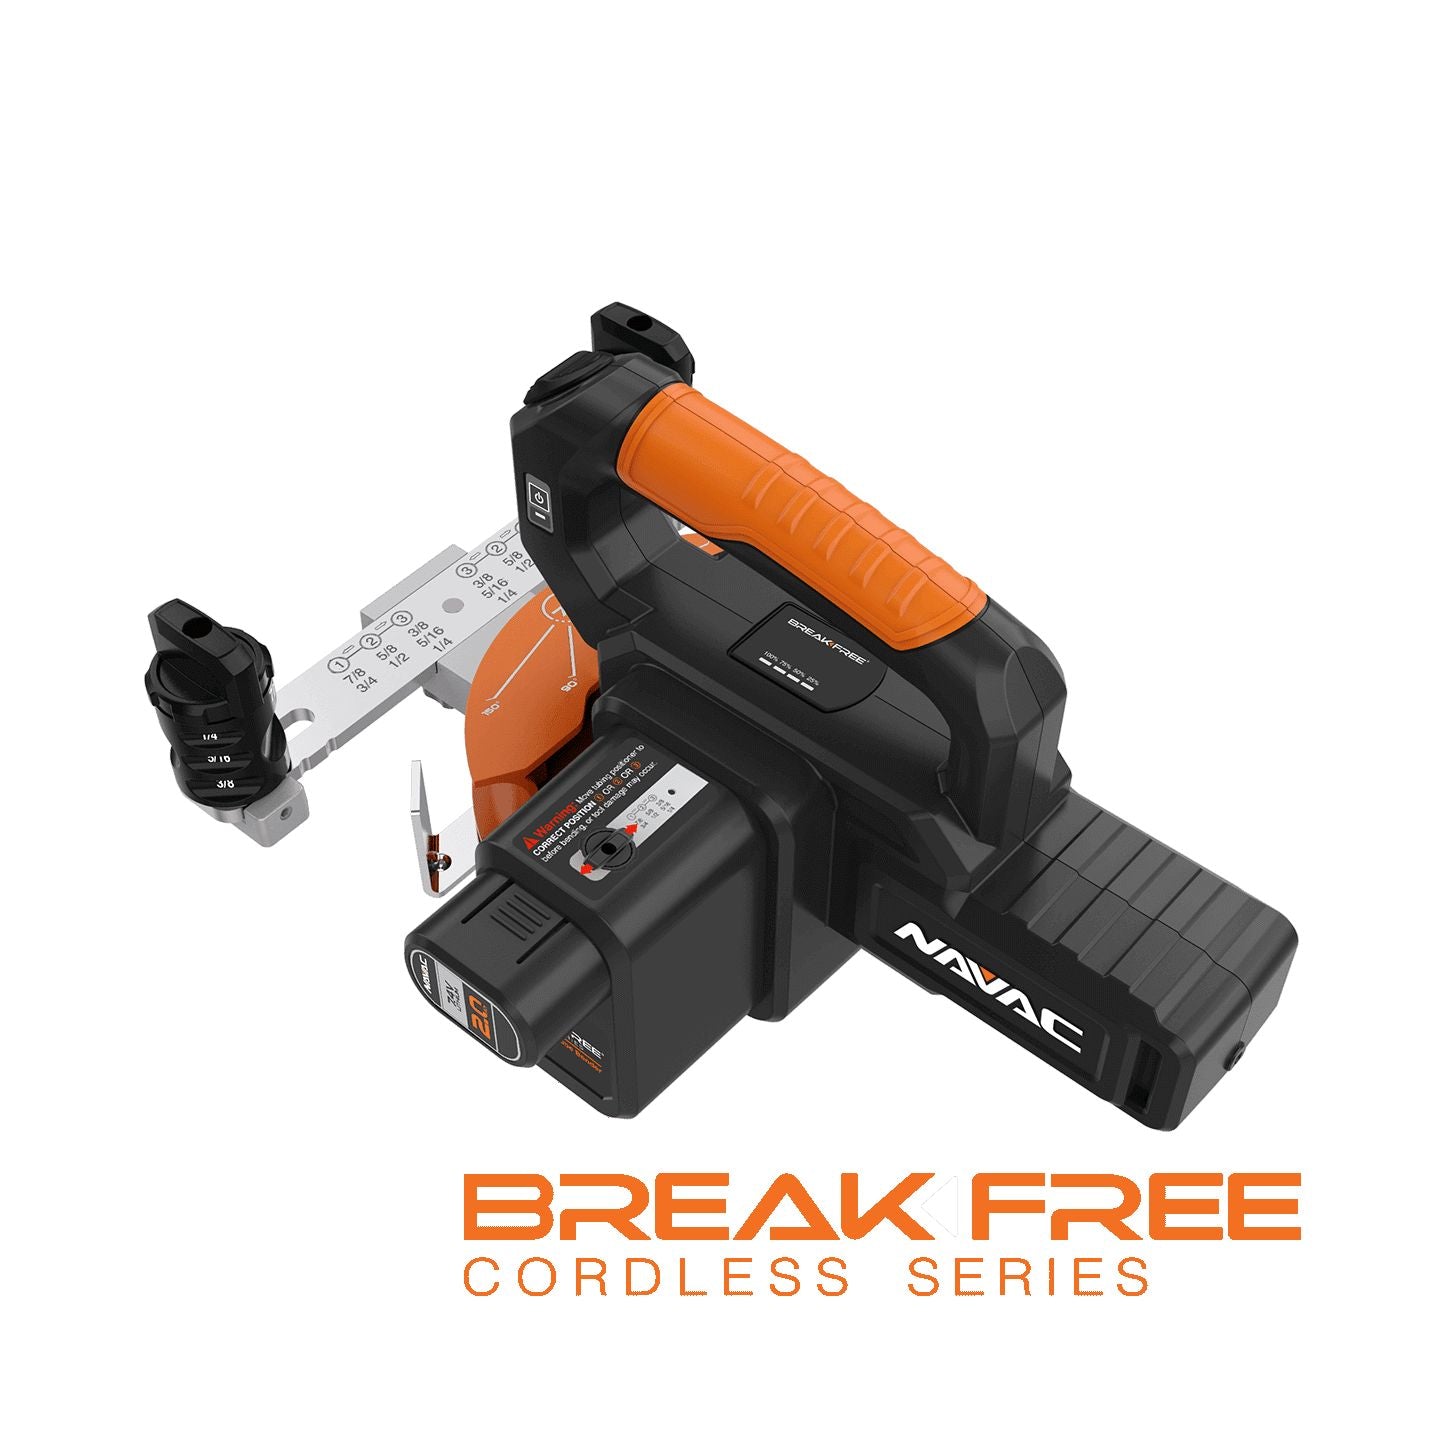 NTB7L - BreakFree Power Tube Bender for Soft Copper Tubing